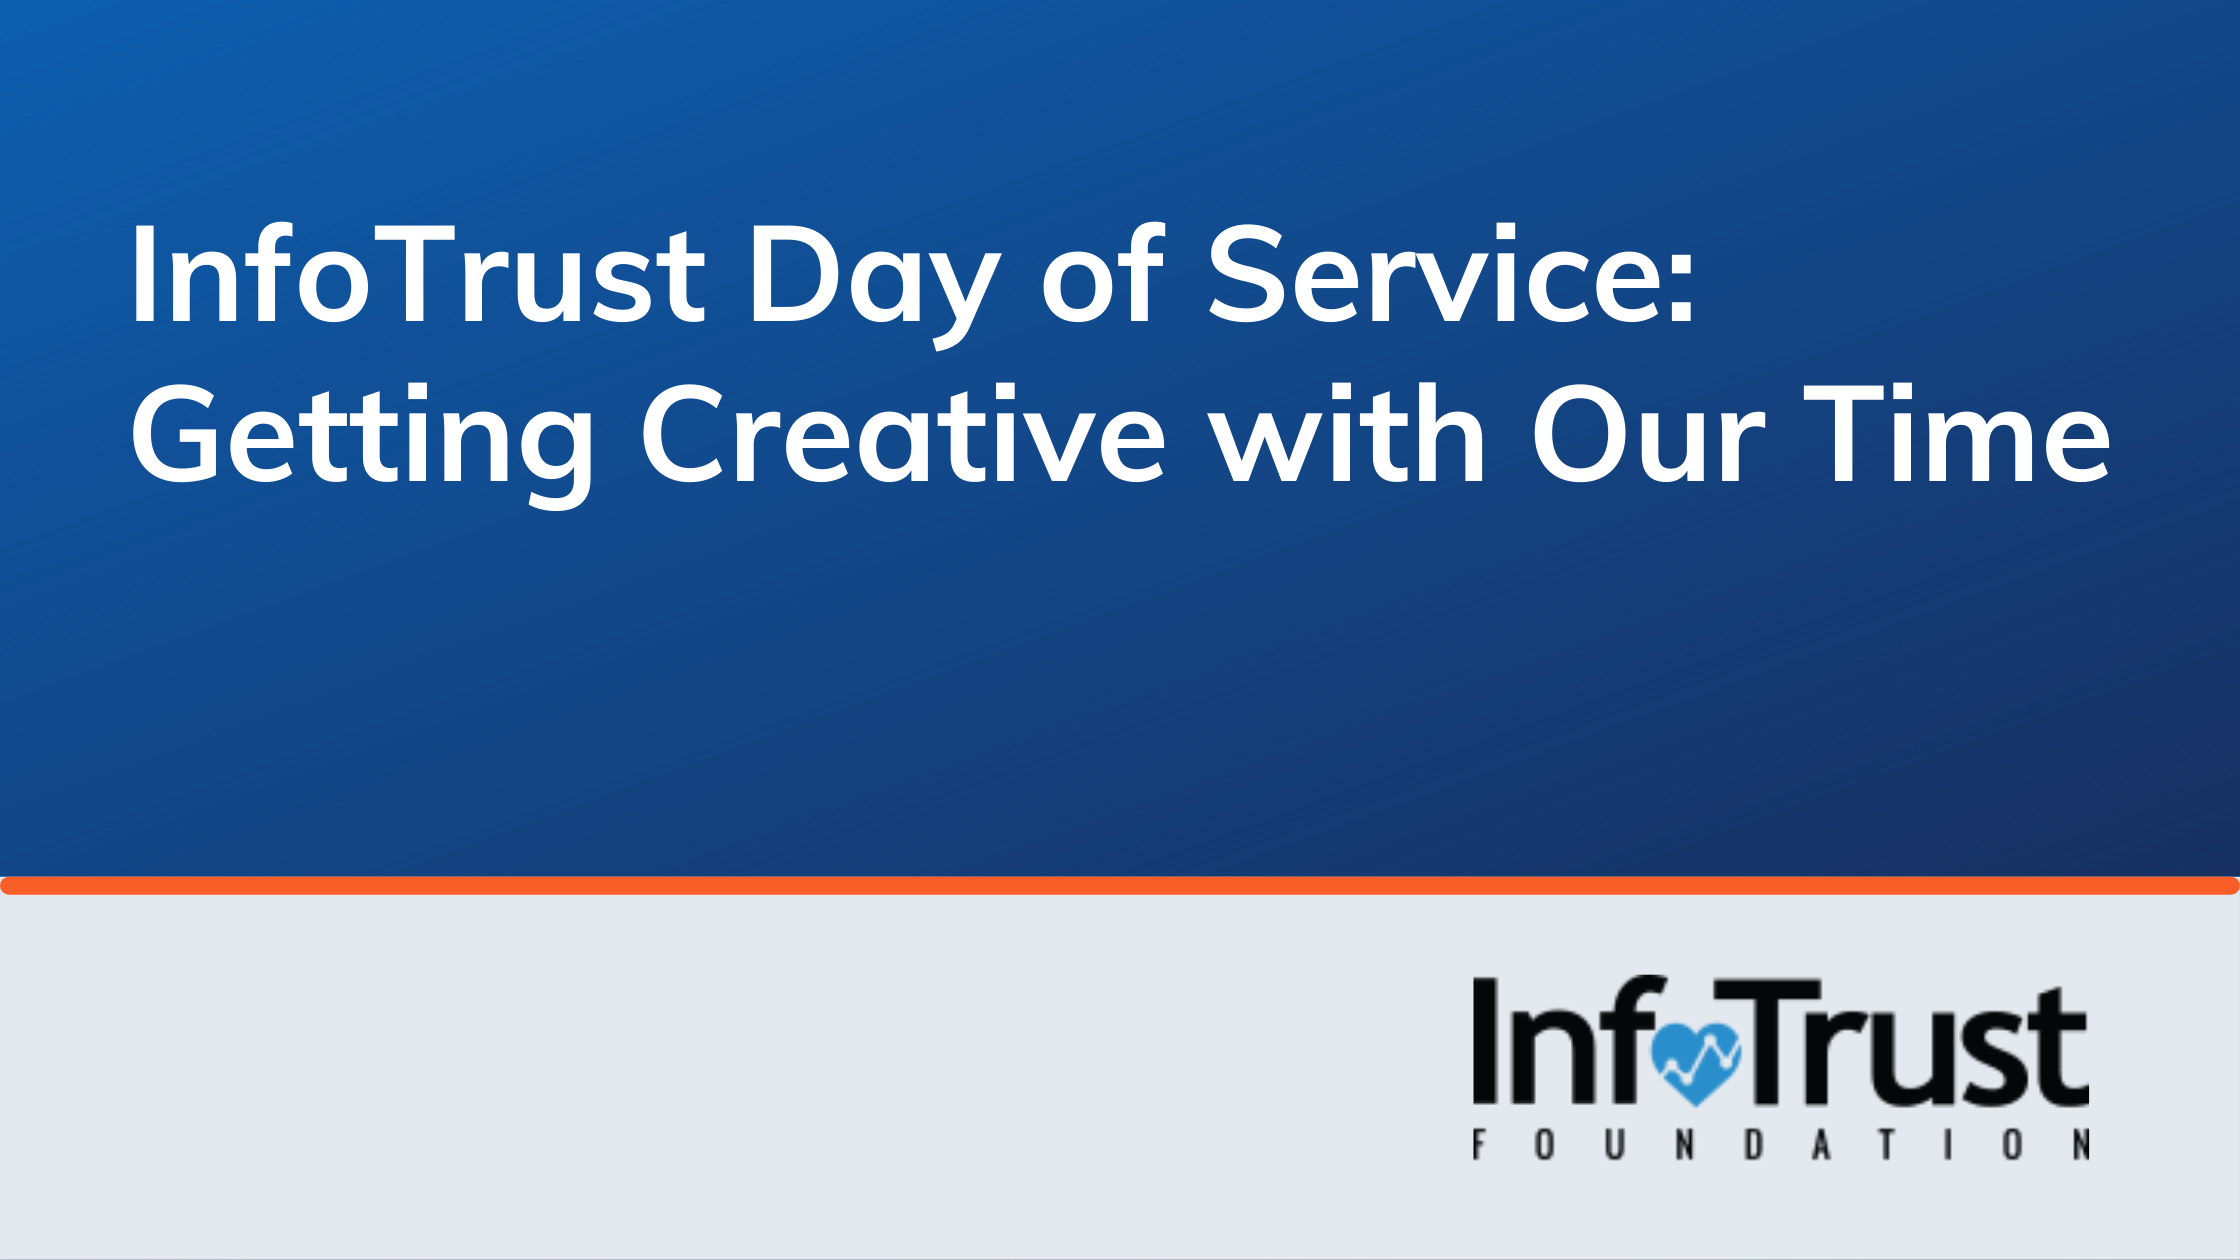 InfoTrust Day of Service: Getting Creative with Our Time